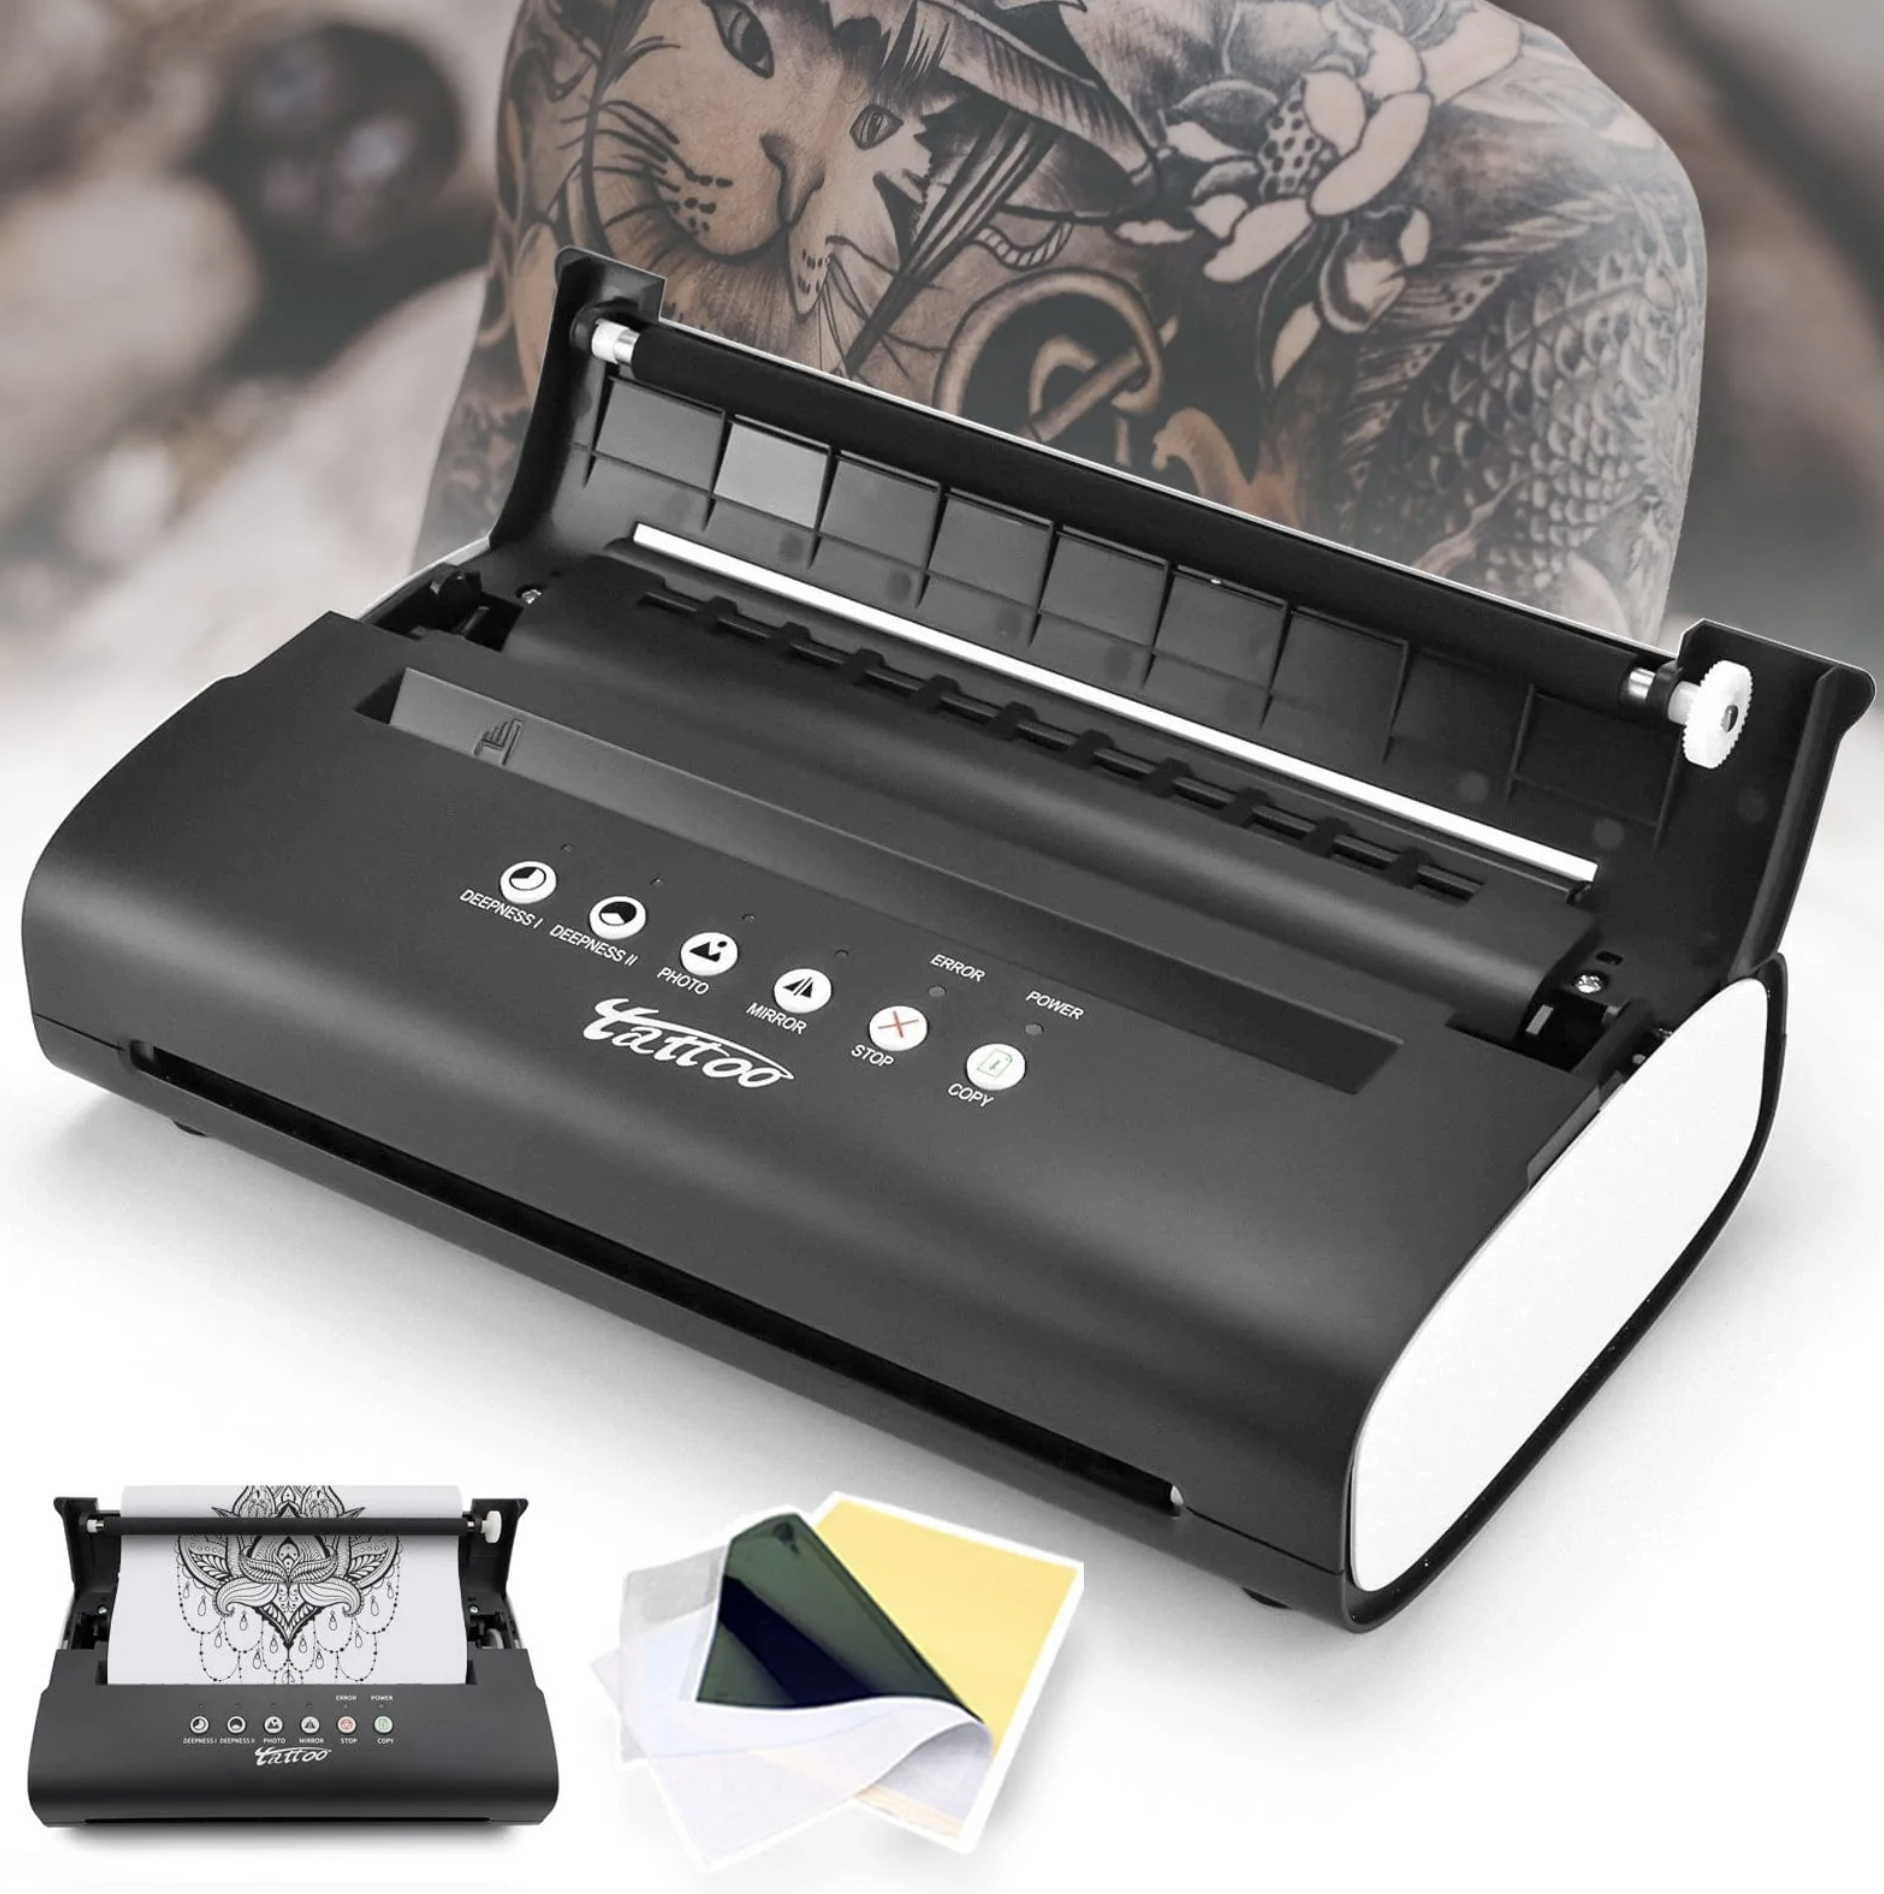 Other Permanent Makeup Supply Tattoo Inkjet Stencil Printer M105 230925  From Fan04, $332.93 | DHgate.Com